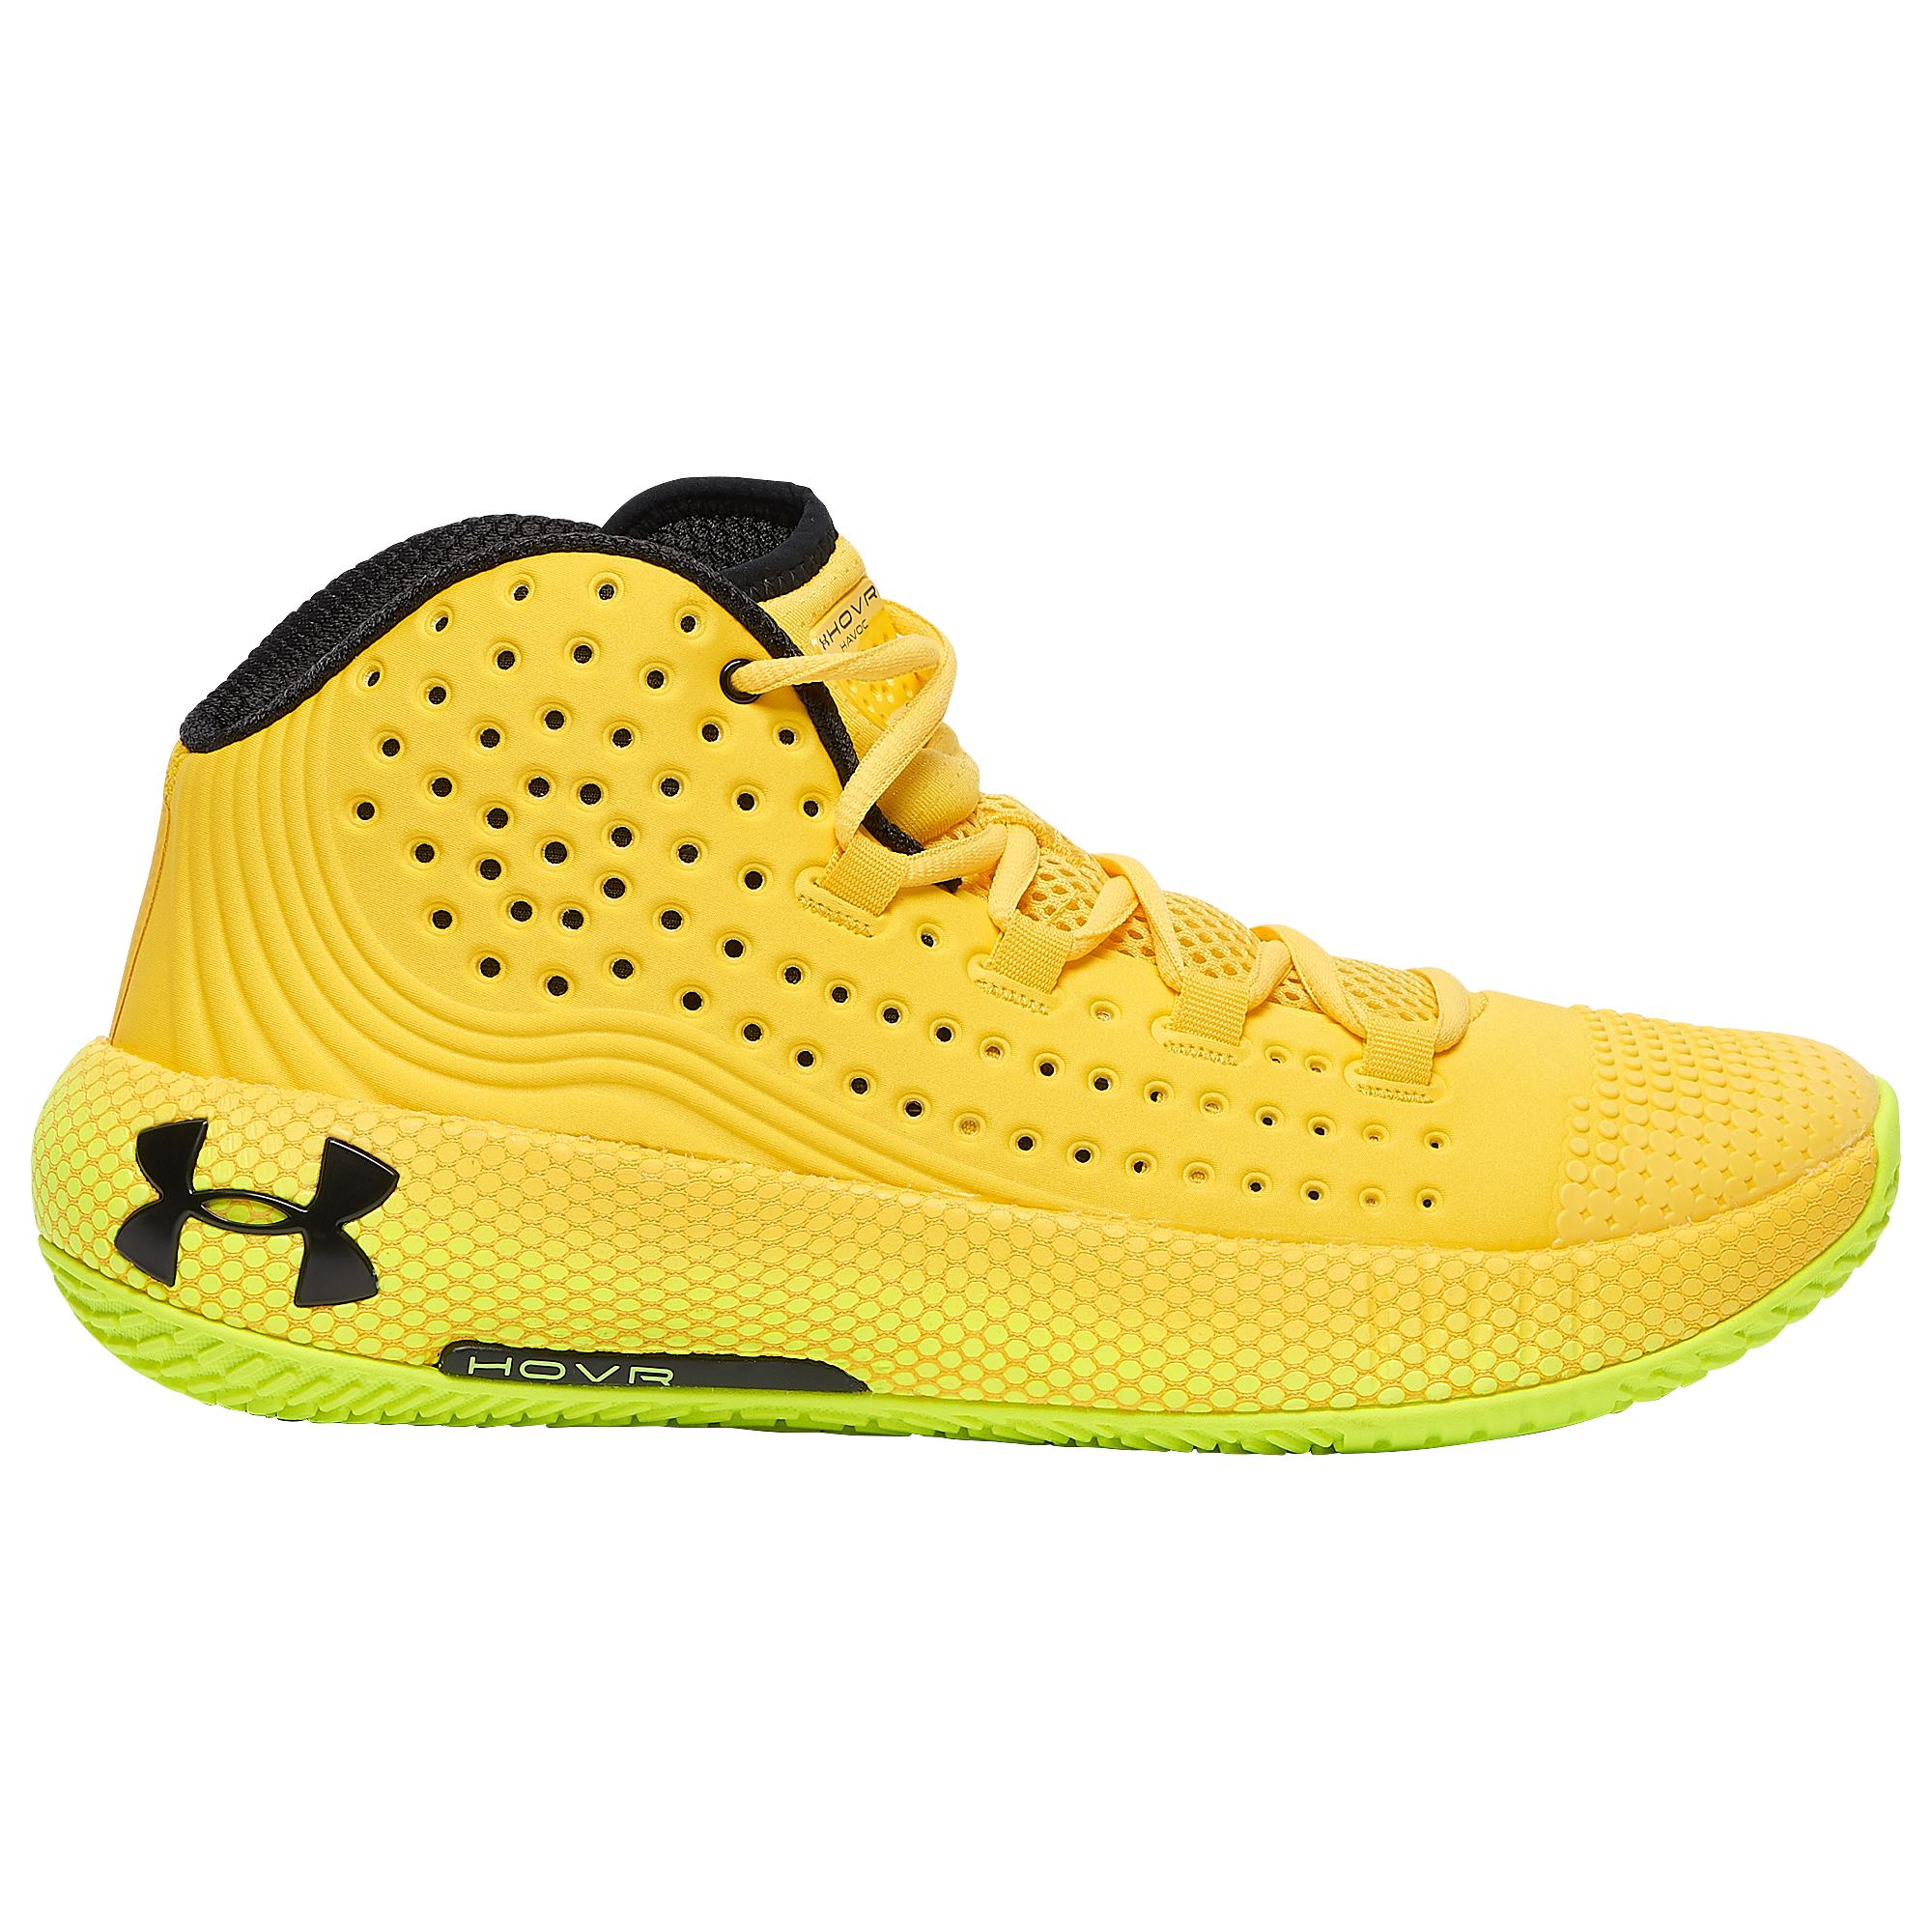 Under Armour Rubber Hovr Havoc 2 in Yellow for Men - Lyst